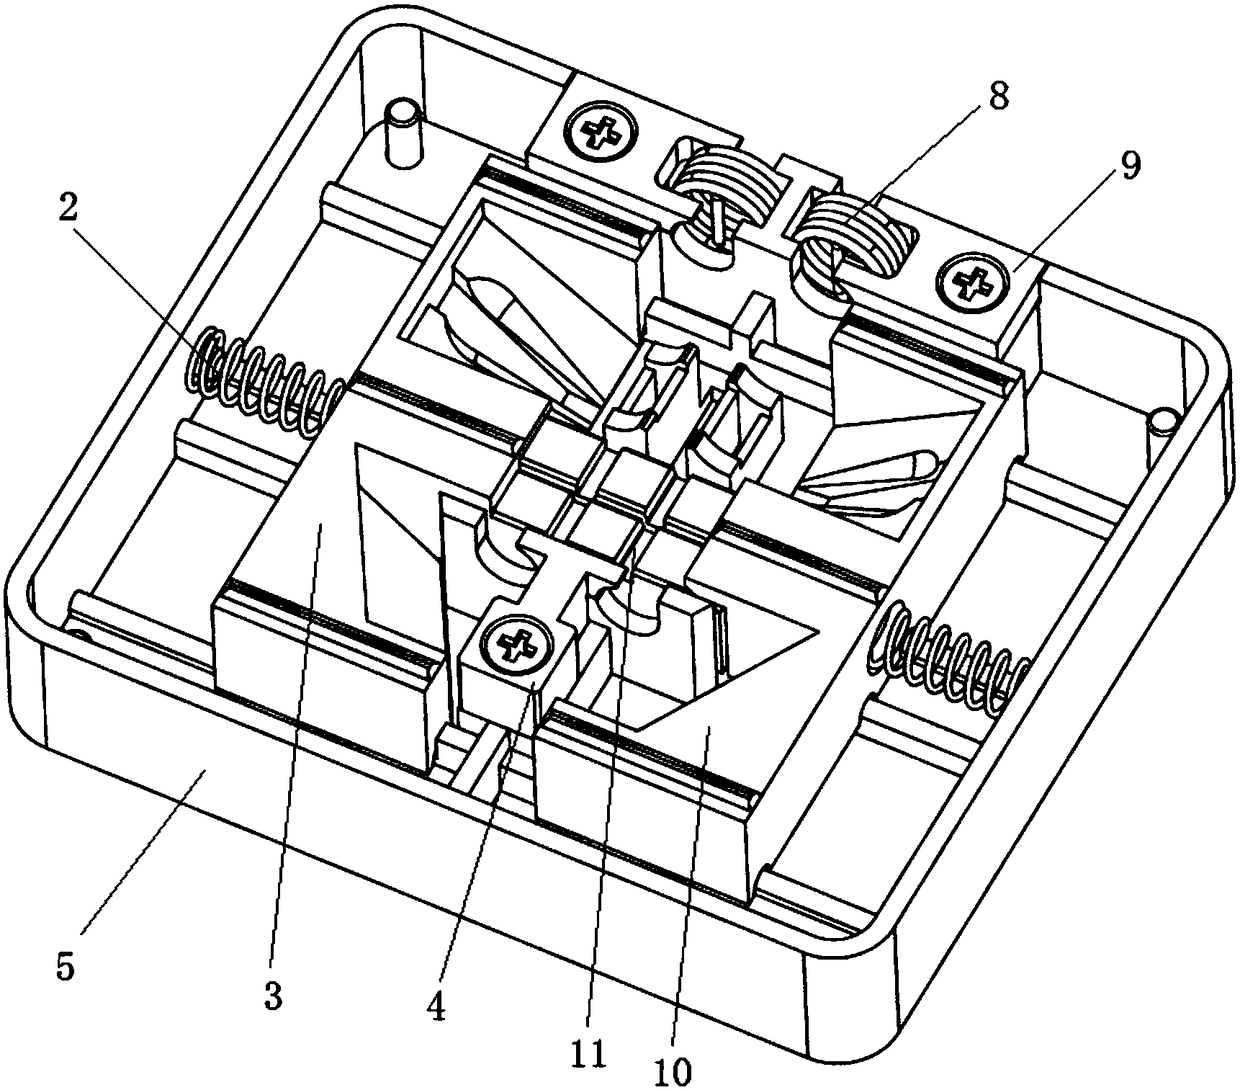 A double self-locking safety door device and a power socket using the safety door device